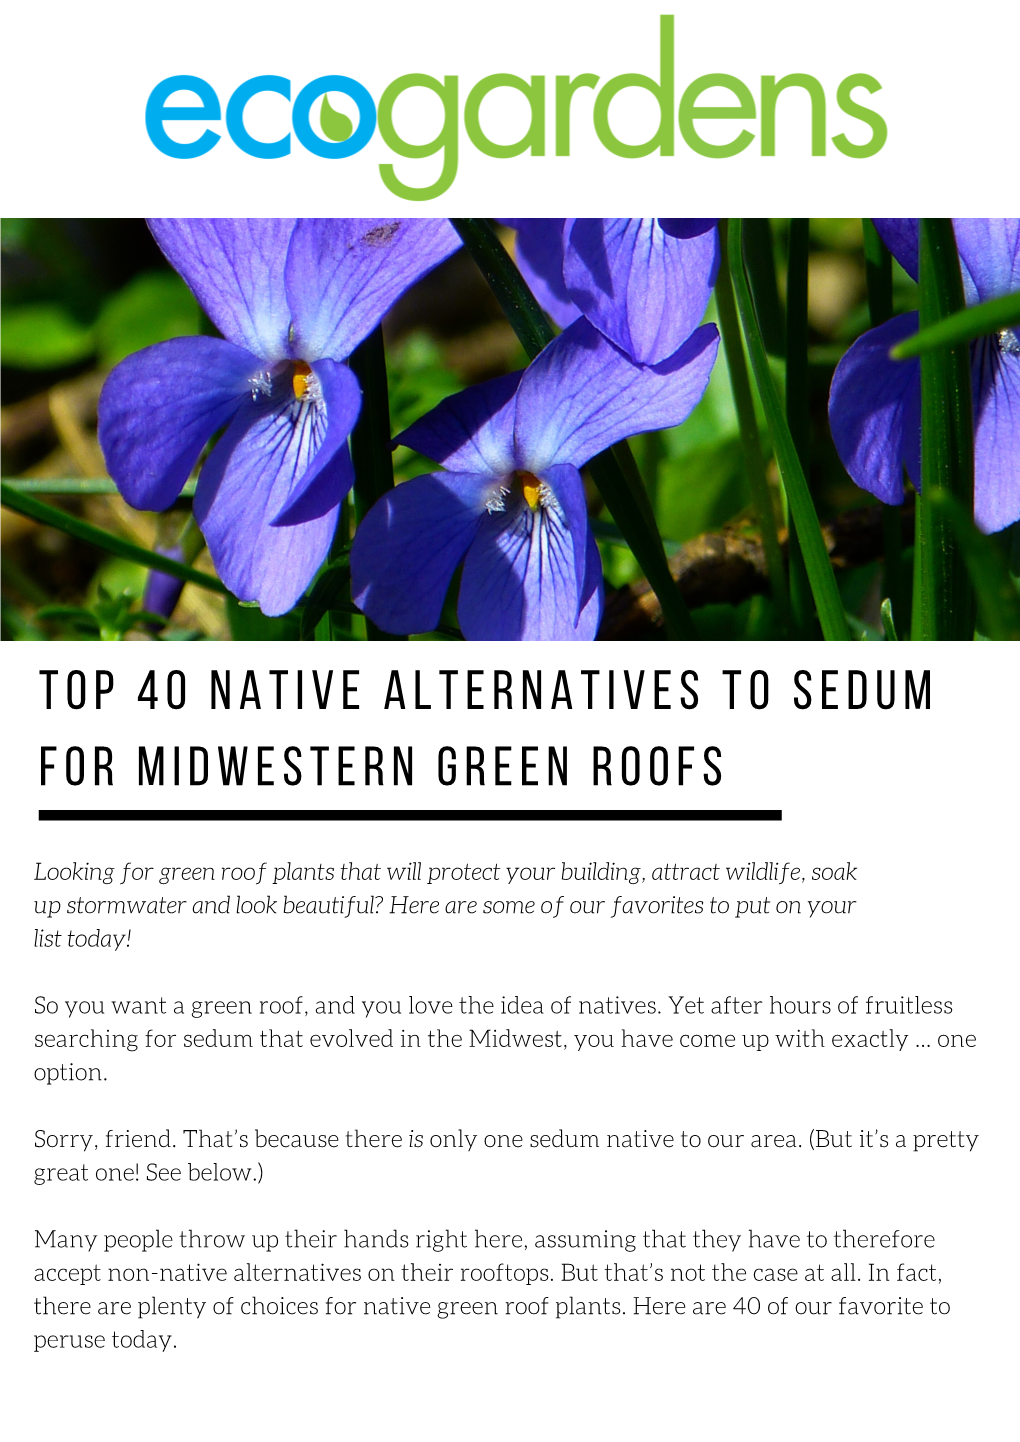 Top 40 Native Alternatives to Sedum for Midwestern Green Roofs